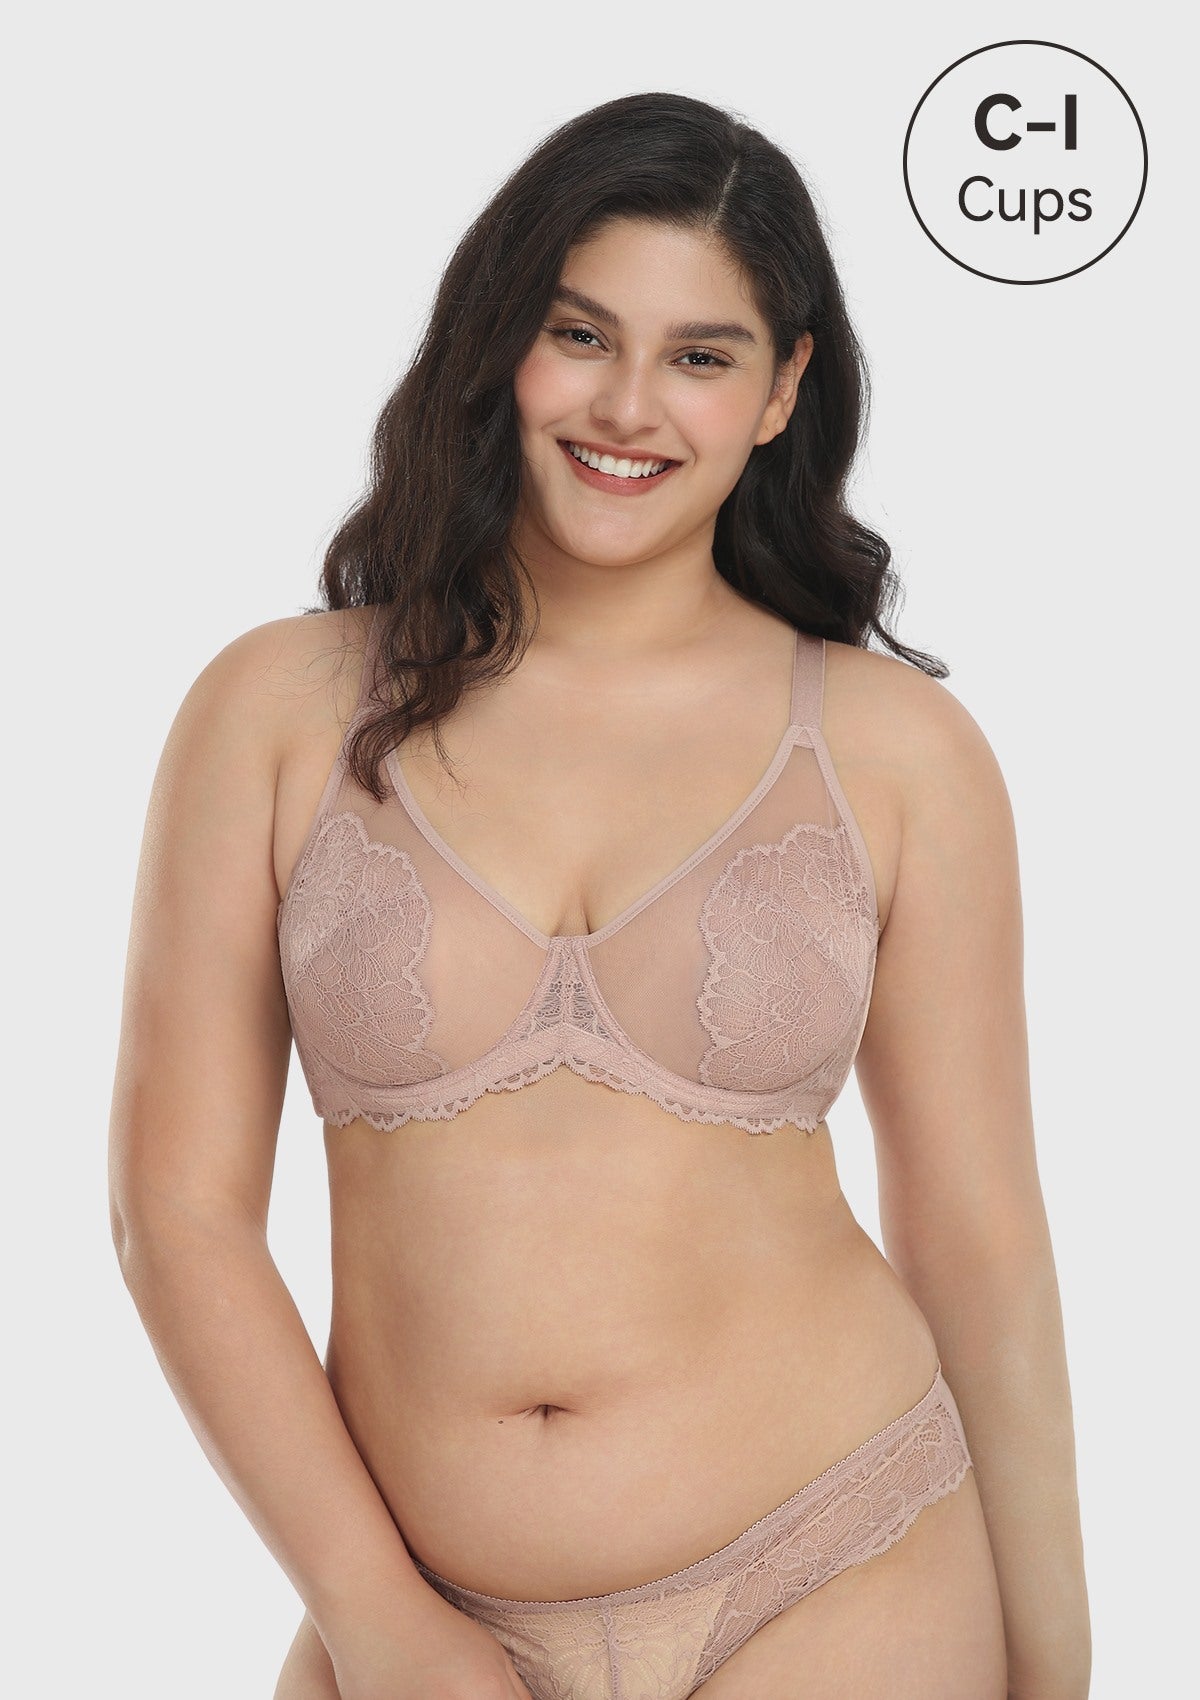 HSIA Blossom Plus Size Lace Bra - Wired, Unpadded, See-Through - Dark Pink / 36 / DD/E